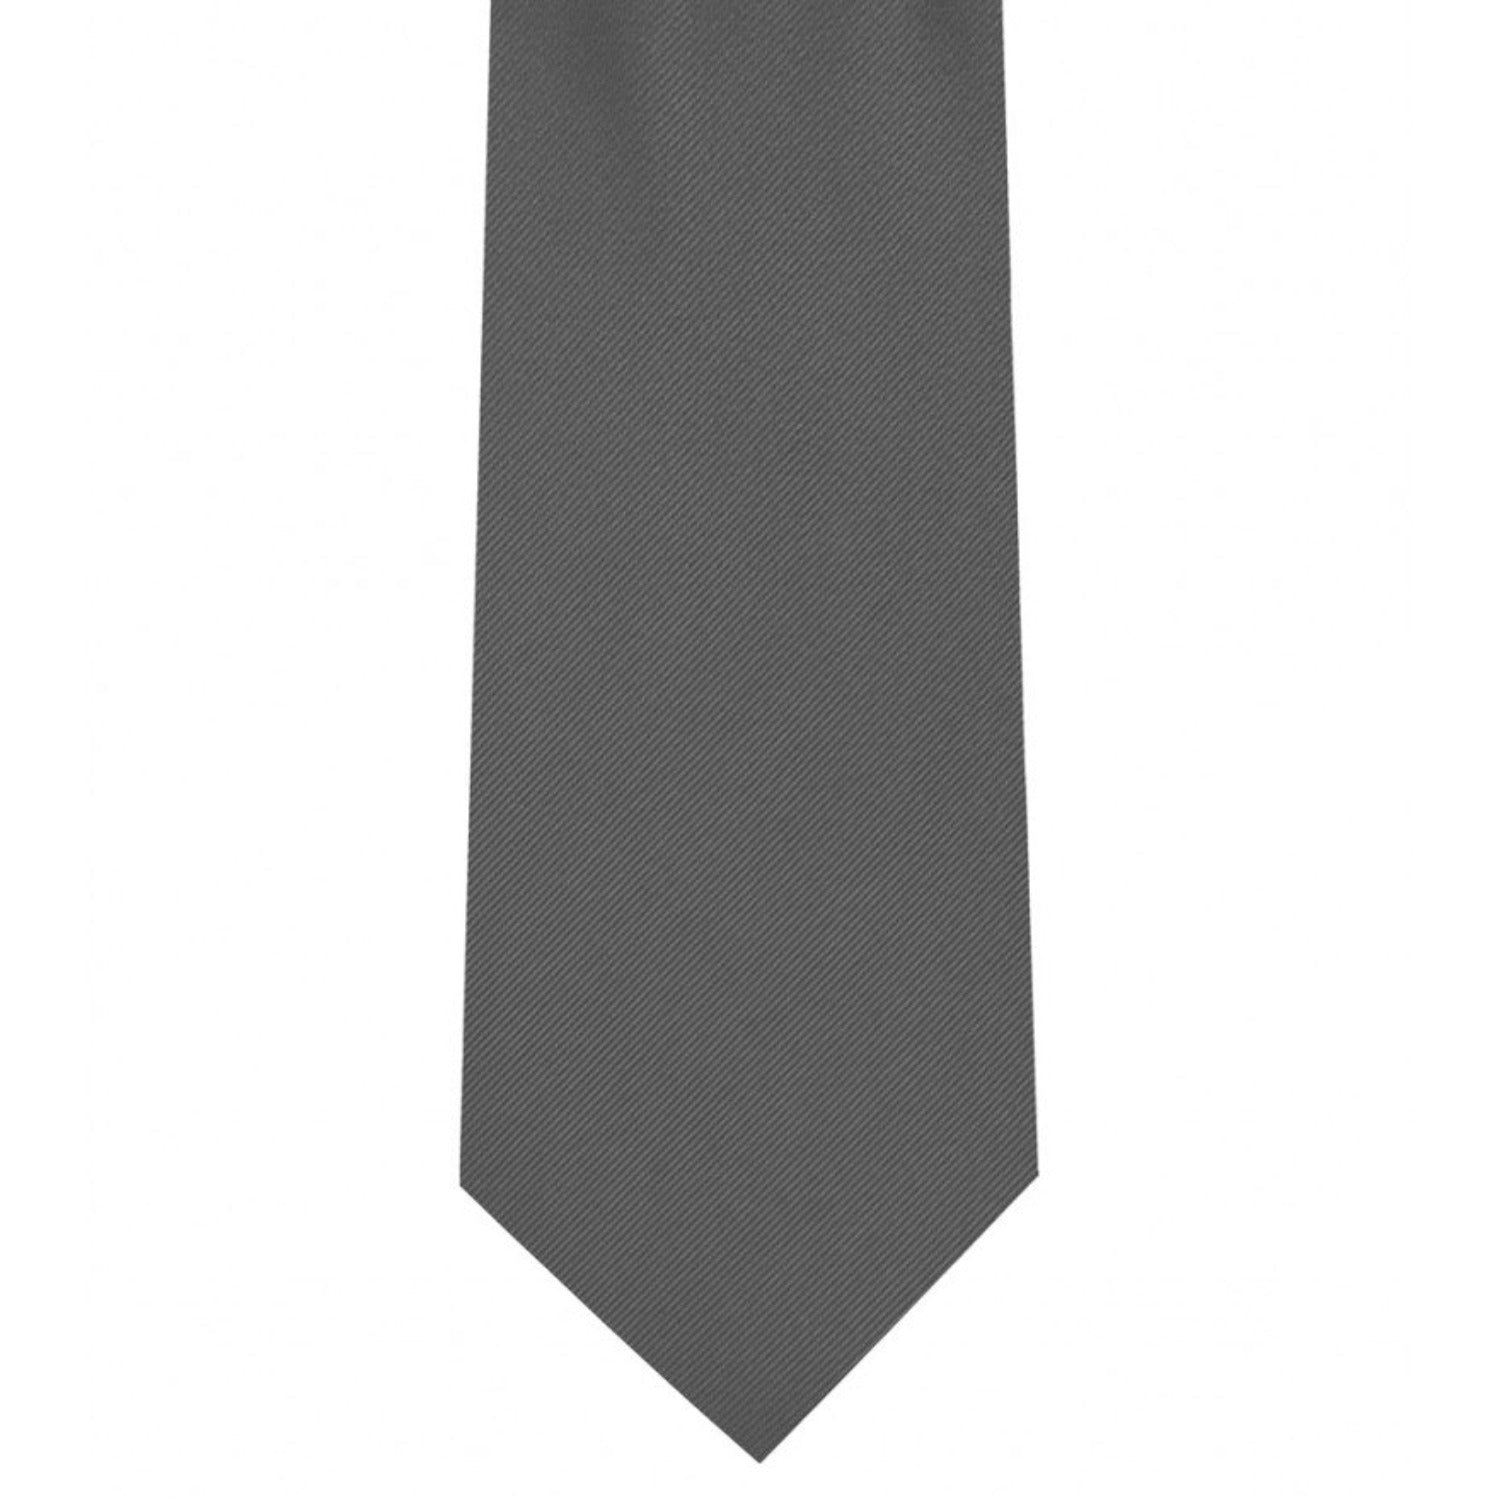 Classic Dark Grey Tie Ultra Skinny tie width 2.25 inches With Matching Pocket Square | KCT Menswear